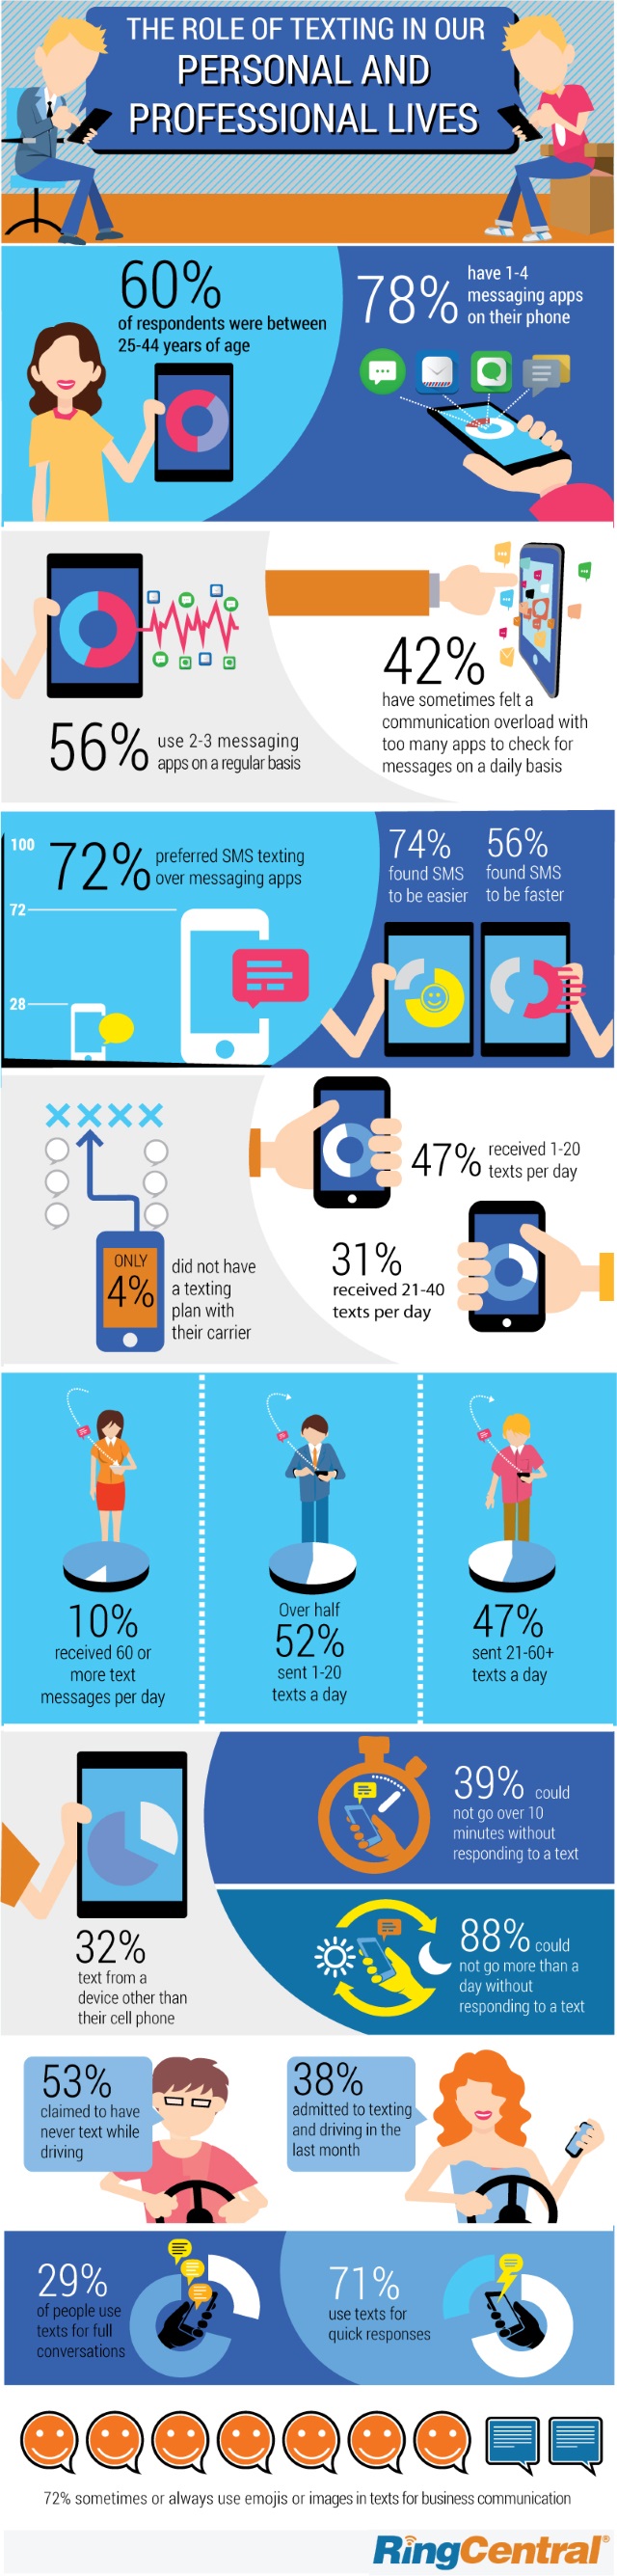 RingCentral Texting Infographic